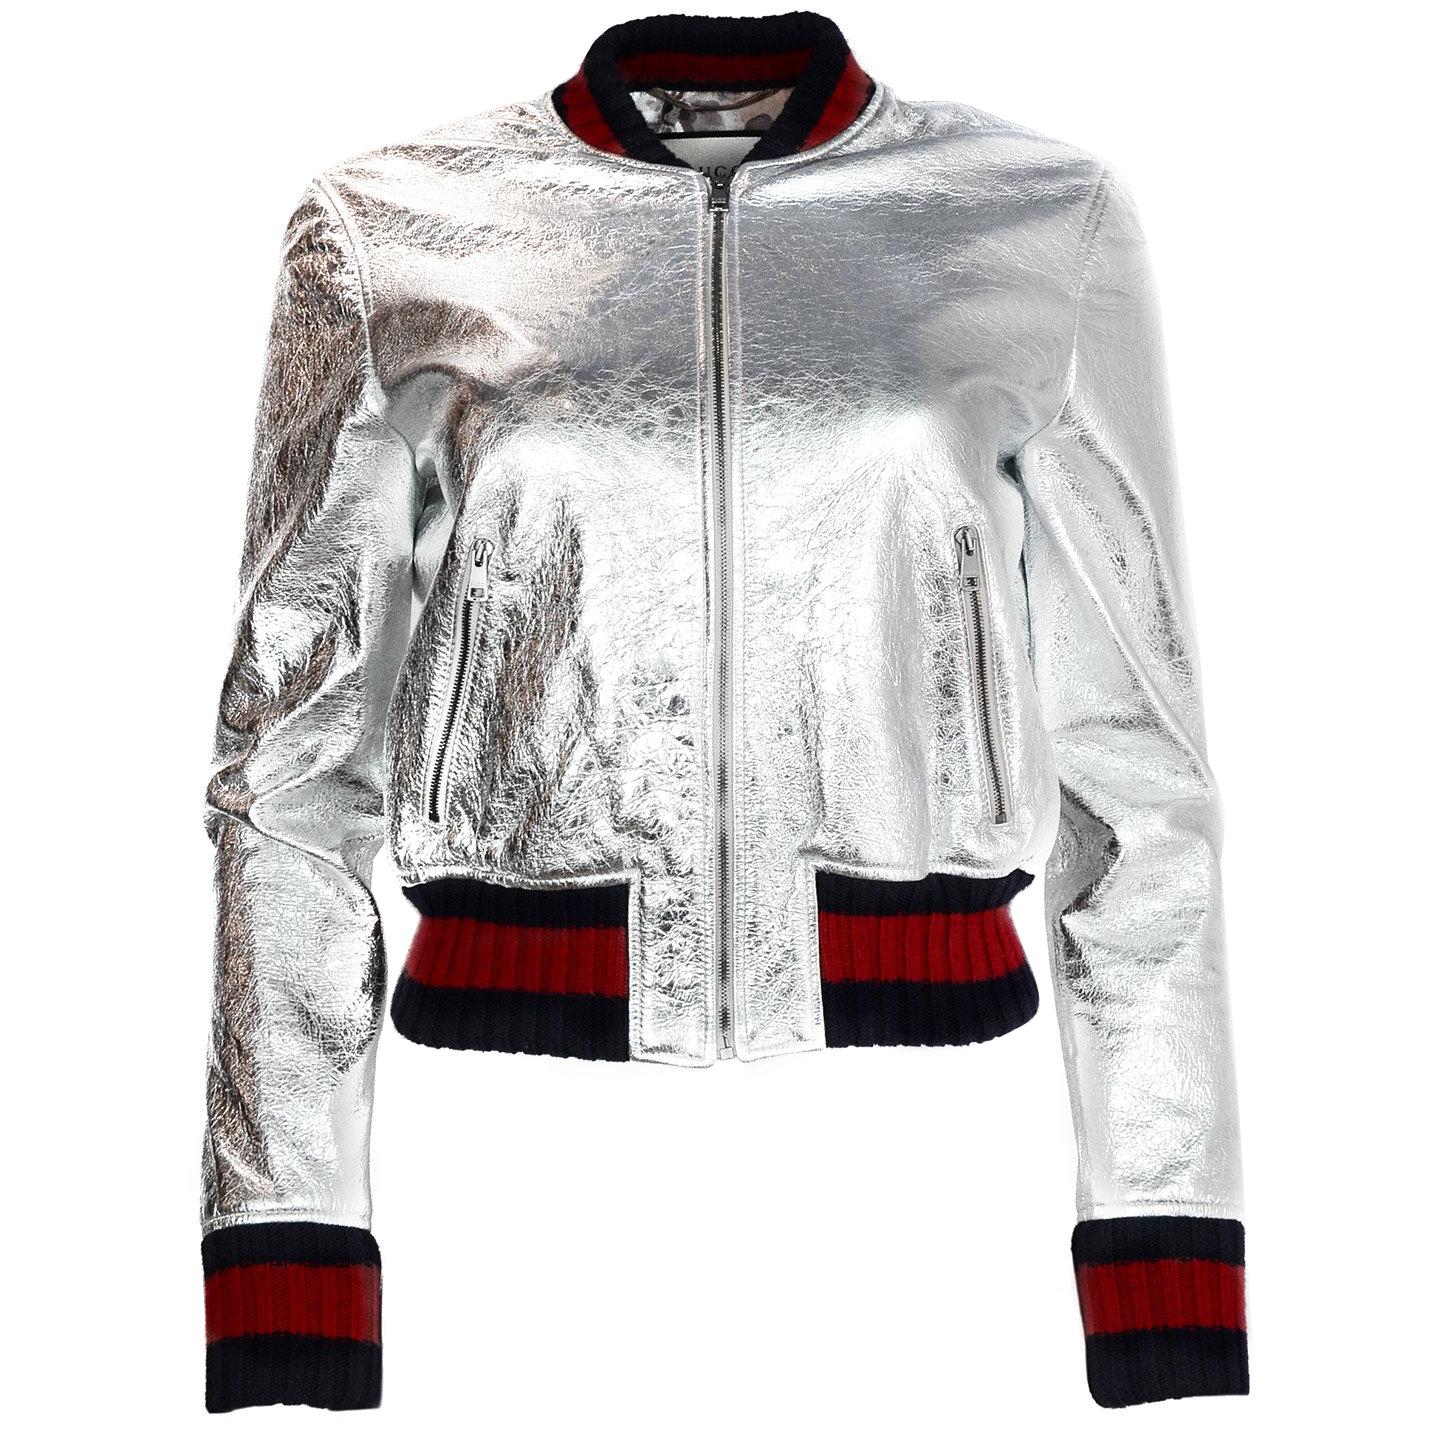 Gucci 2016 Resort Runway Silver Crackled Leather Bomber Jacket w. Web 